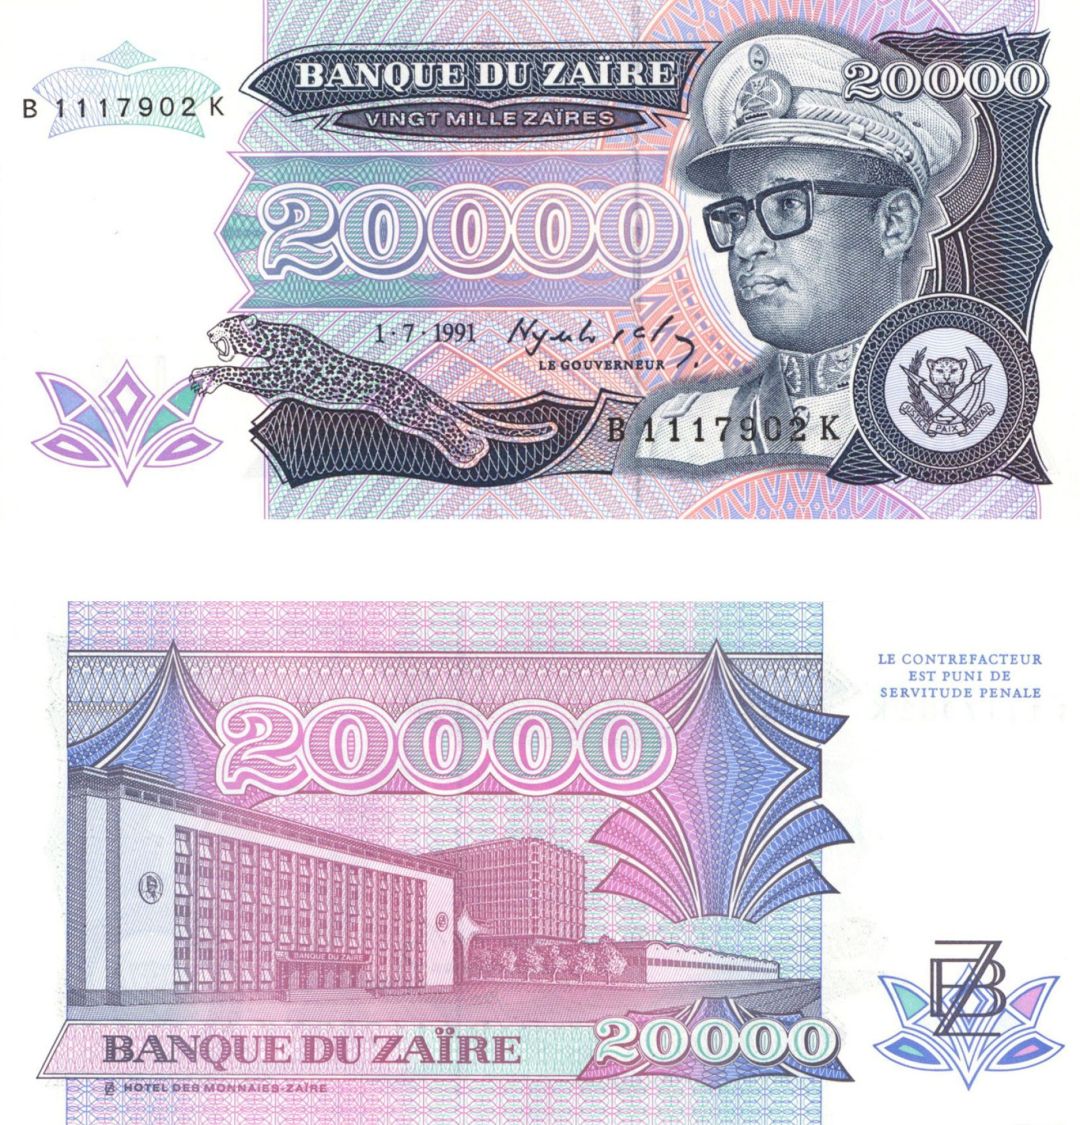 Zaire - 20,000 Zaires - P-39a - 1991 dated Foreign Paper Money